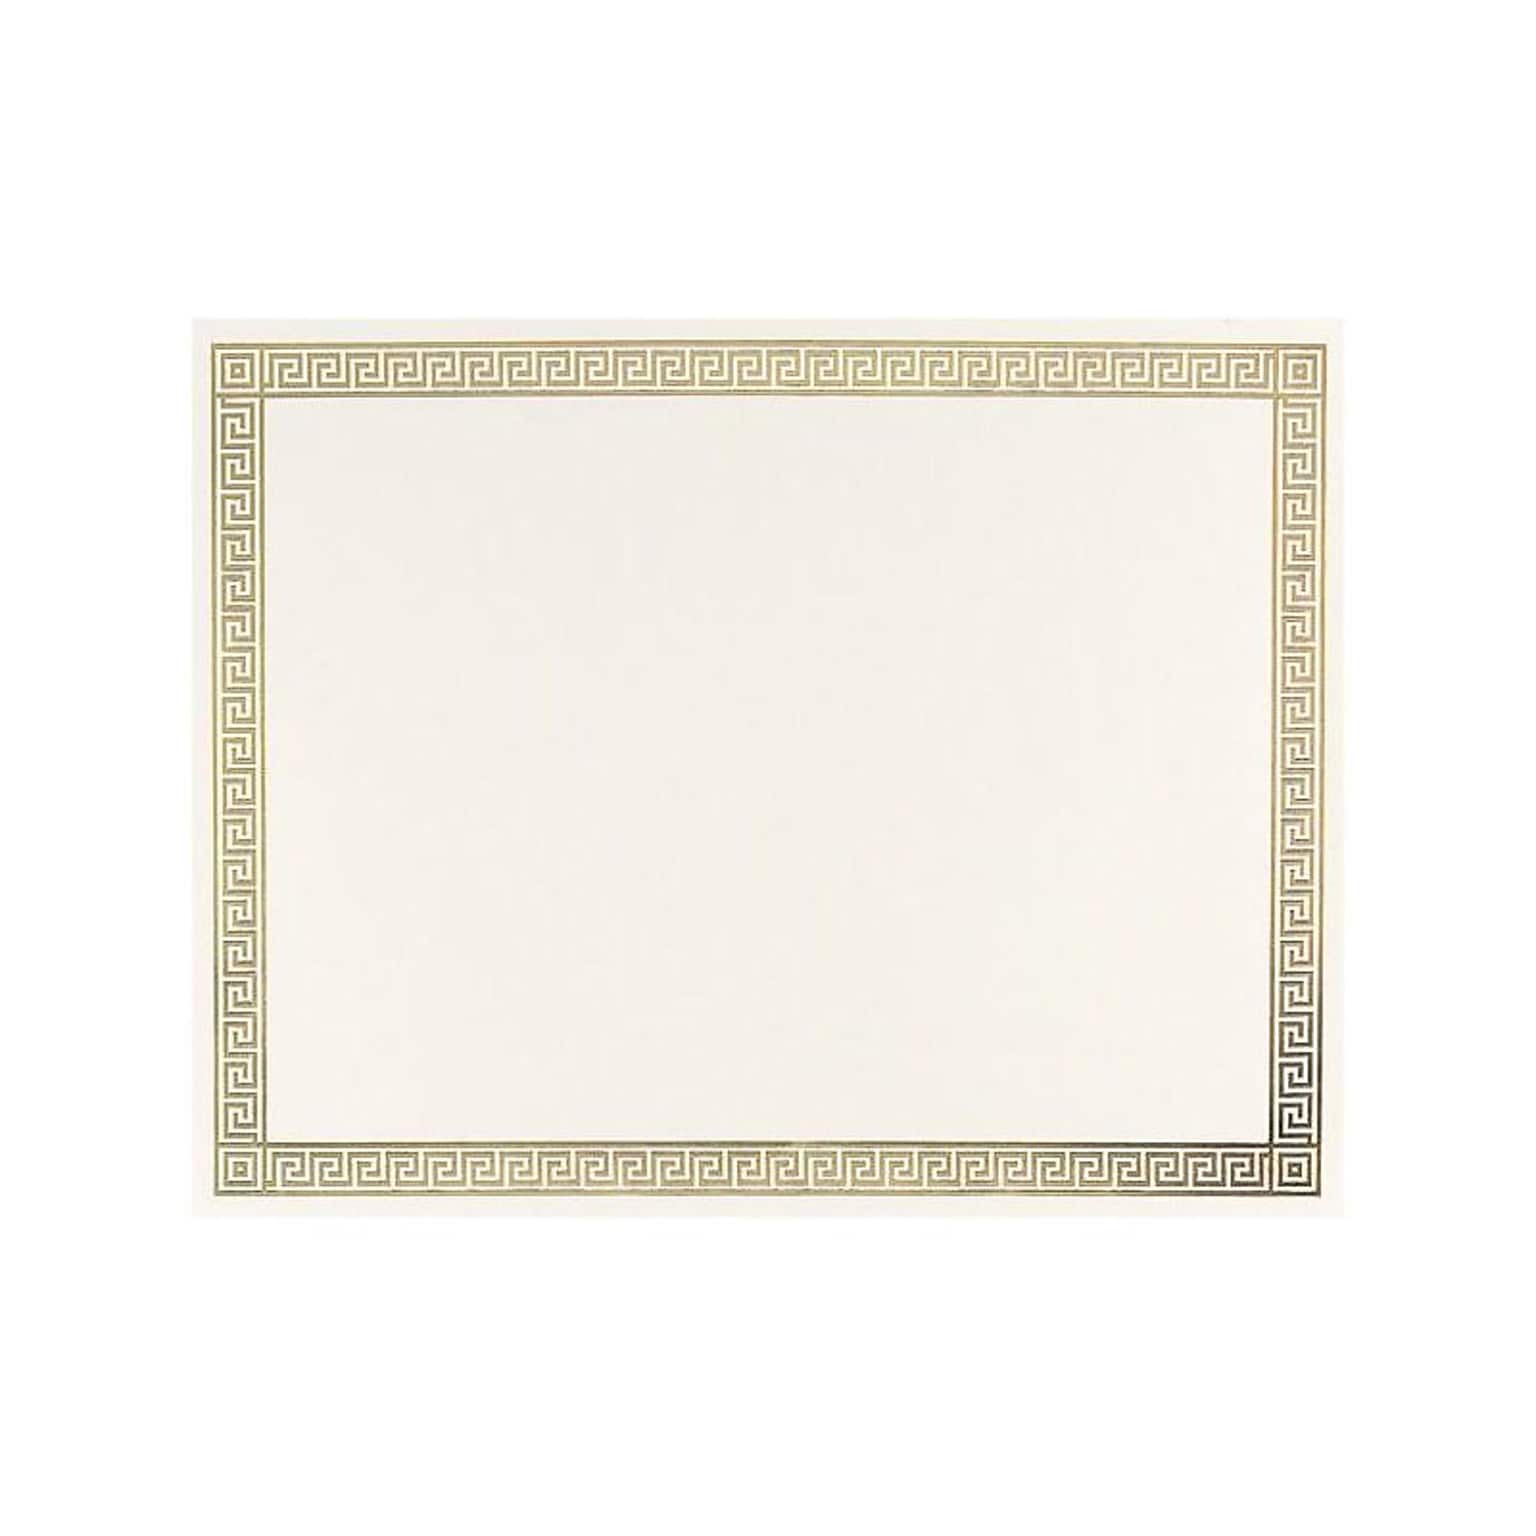 Great Papers Channel Border Foil Certificates, 8.5 x 11, Beige/Gold, 15/Pack (963007)